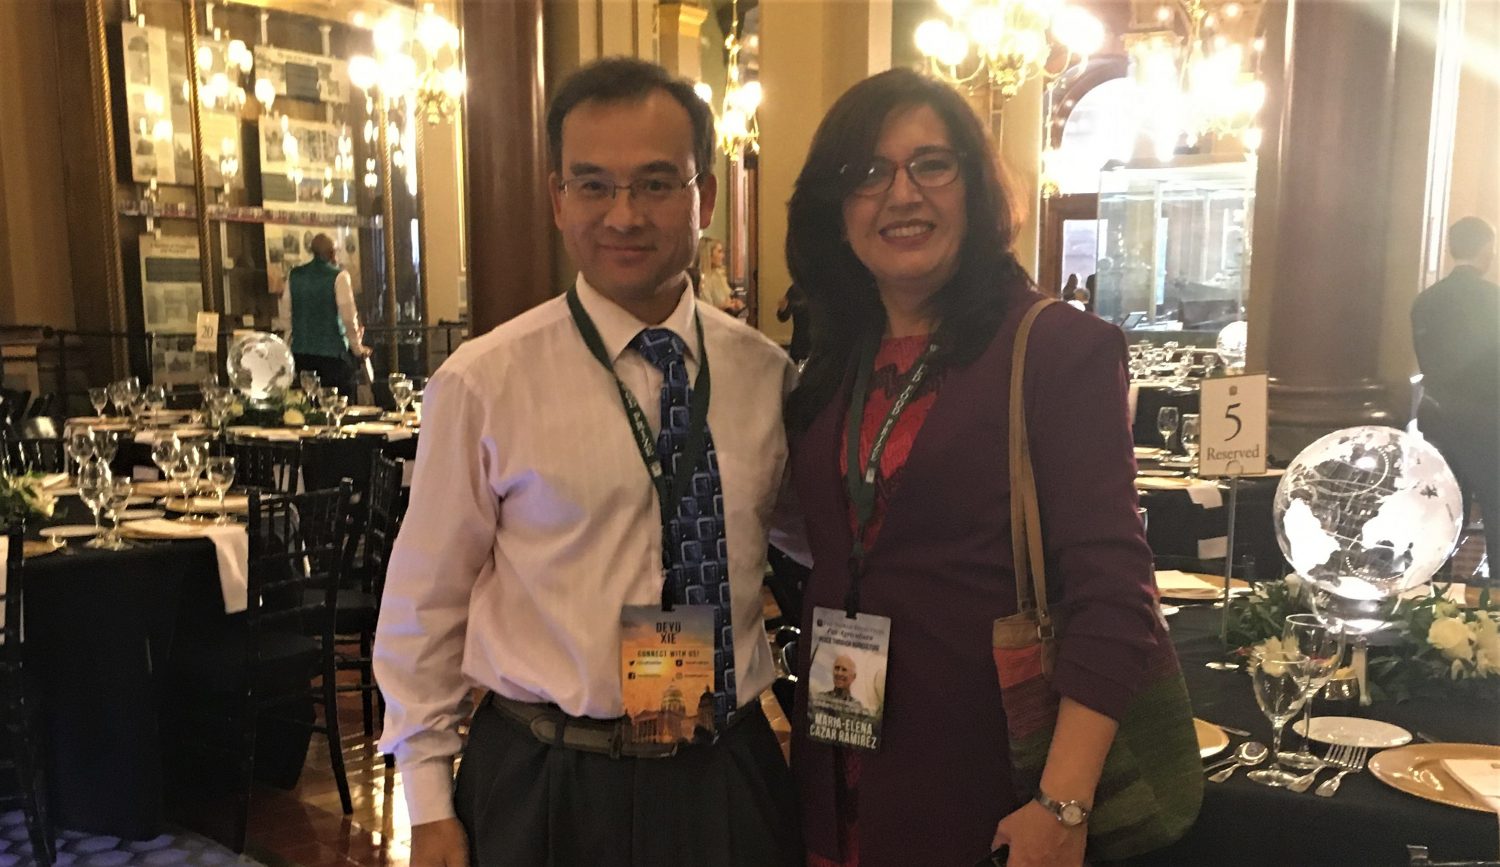 Borlaug Fellow Dr. Maria Elena Cazar and Dr. Deyu Xie from the department of Plant and Microbial Biology, NC State, smile together at the World Food Prize in Iowa